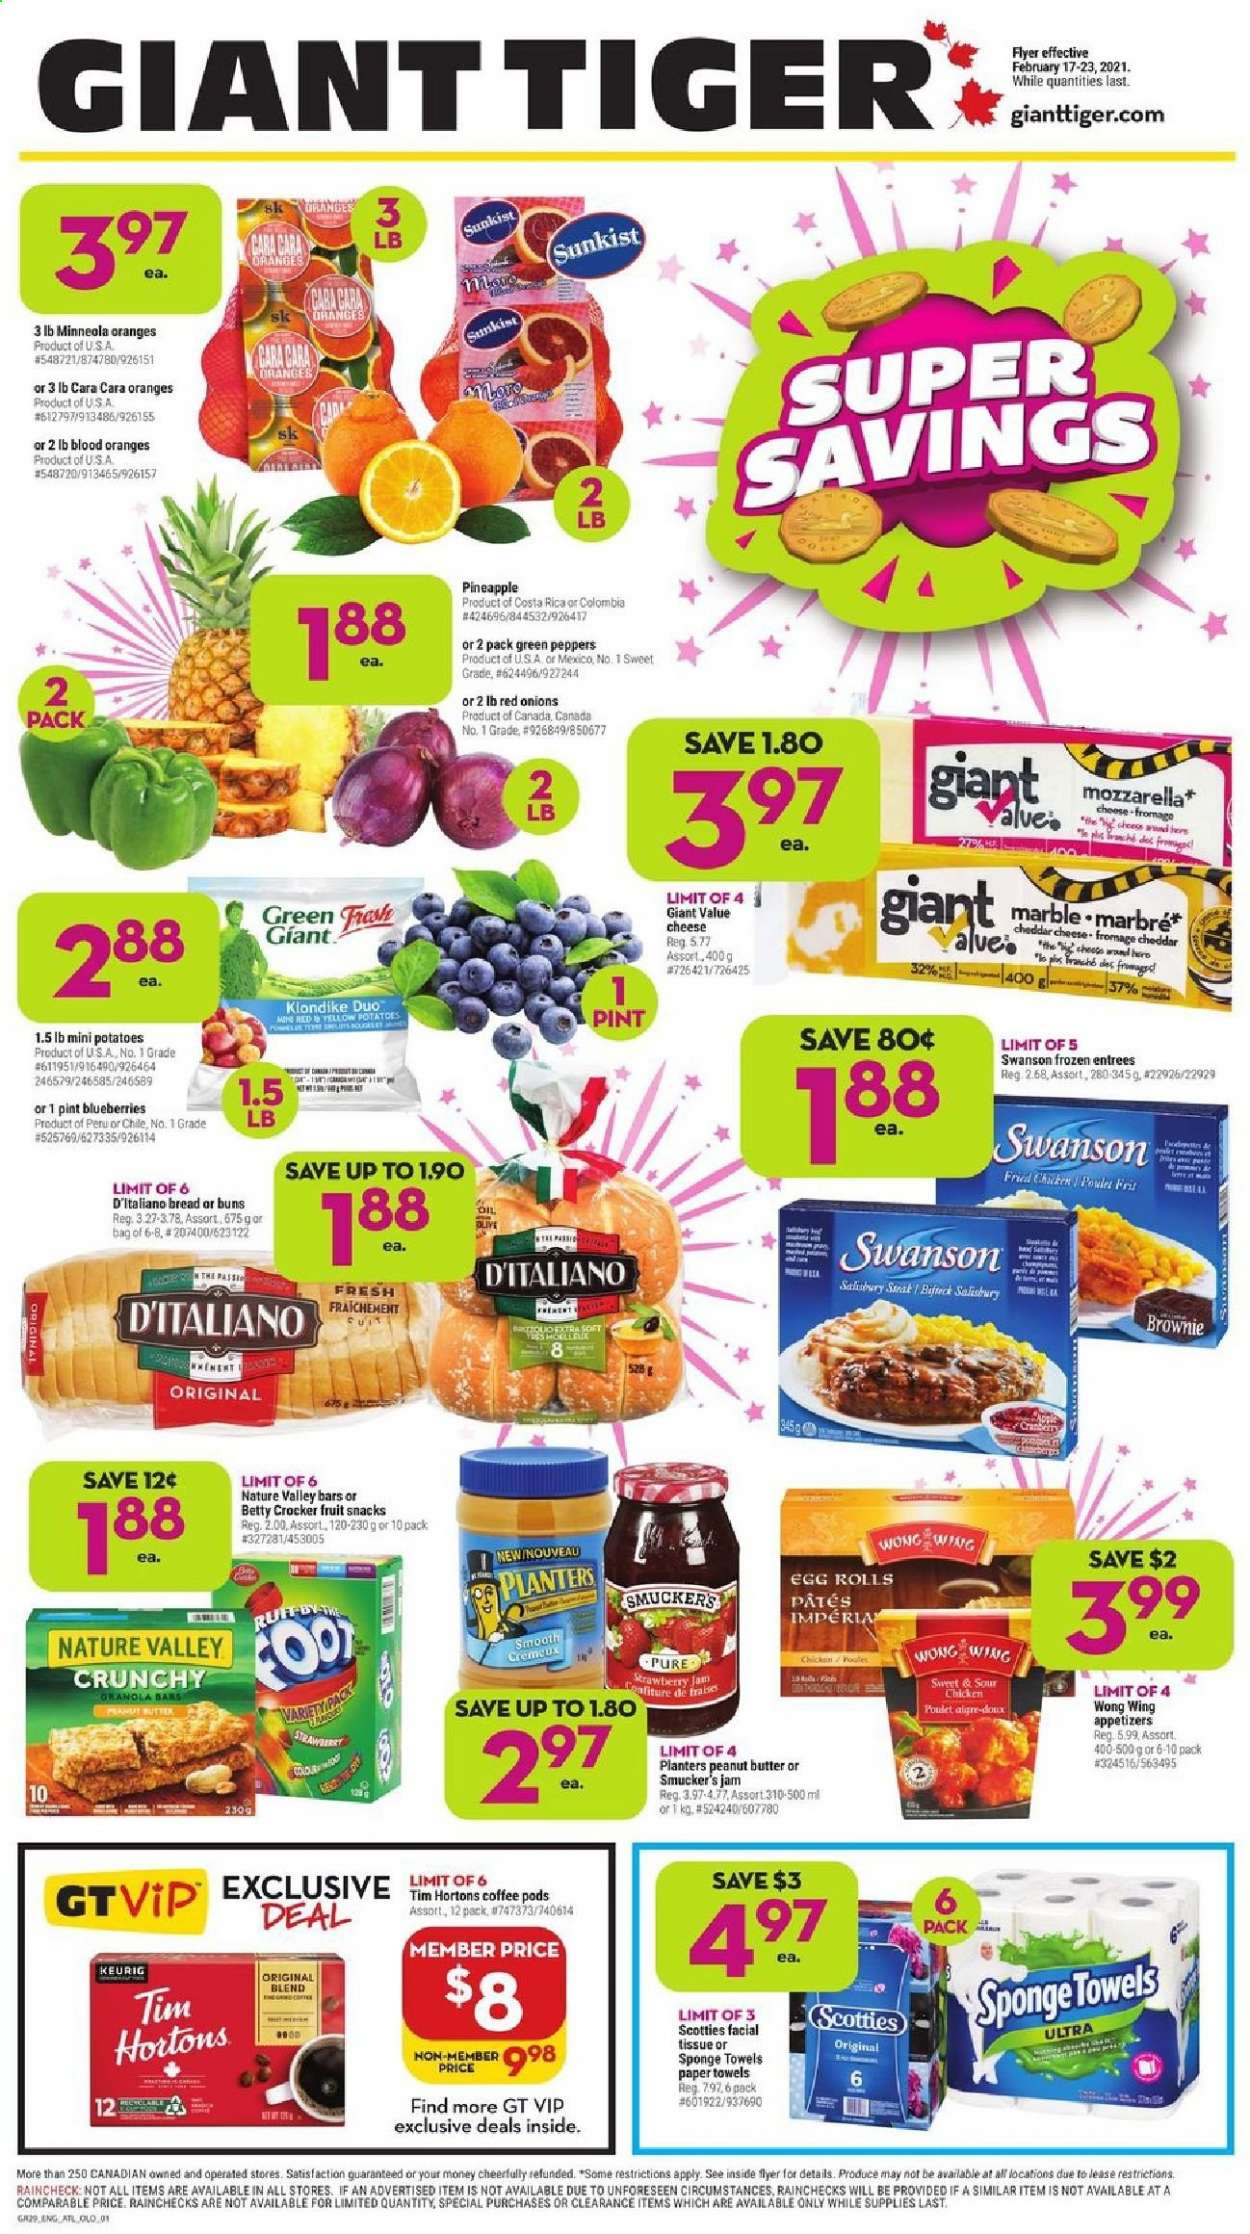 thumbnail - Giant Tiger Flyer - February 17, 2021 - February 23, 2021 - Sales products - bread, buns, brownies, red onions, potatoes, onion, peppers, blueberries, pineapple, egg rolls, cheddar, cheese, fruit snack, Nature Valley, oil, fruit jam, peanut butter, Planters, coffee pods, Keurig, tissues, kitchen towels, paper towels, sponge, steak. Page 1.